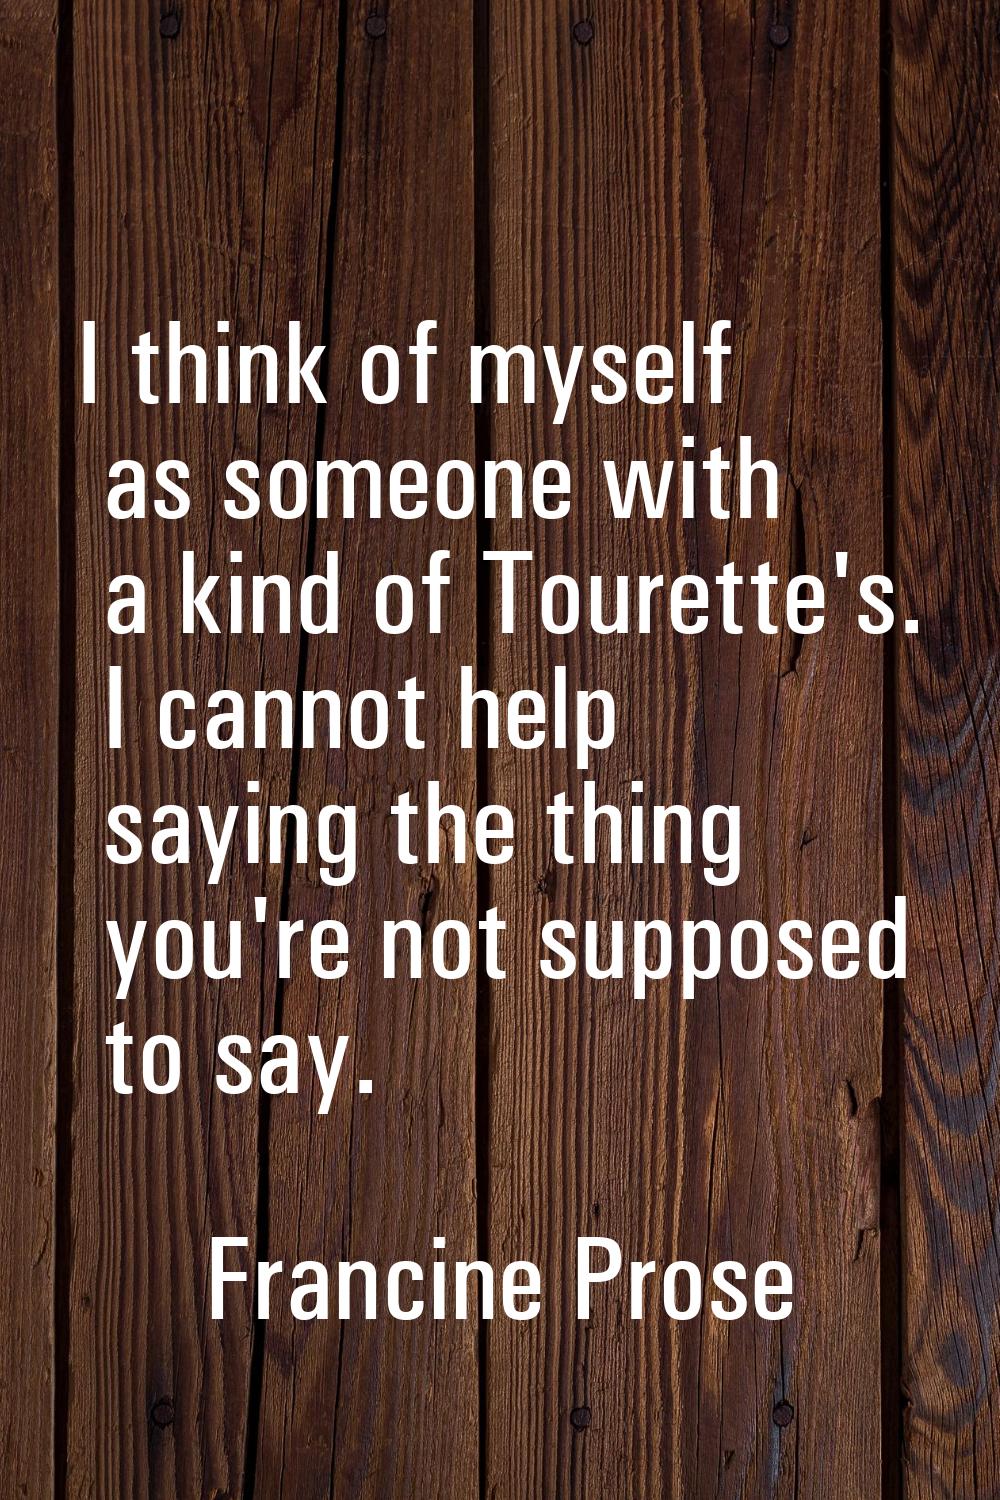 I think of myself as someone with a kind of Tourette's. I cannot help saying the thing you're not s